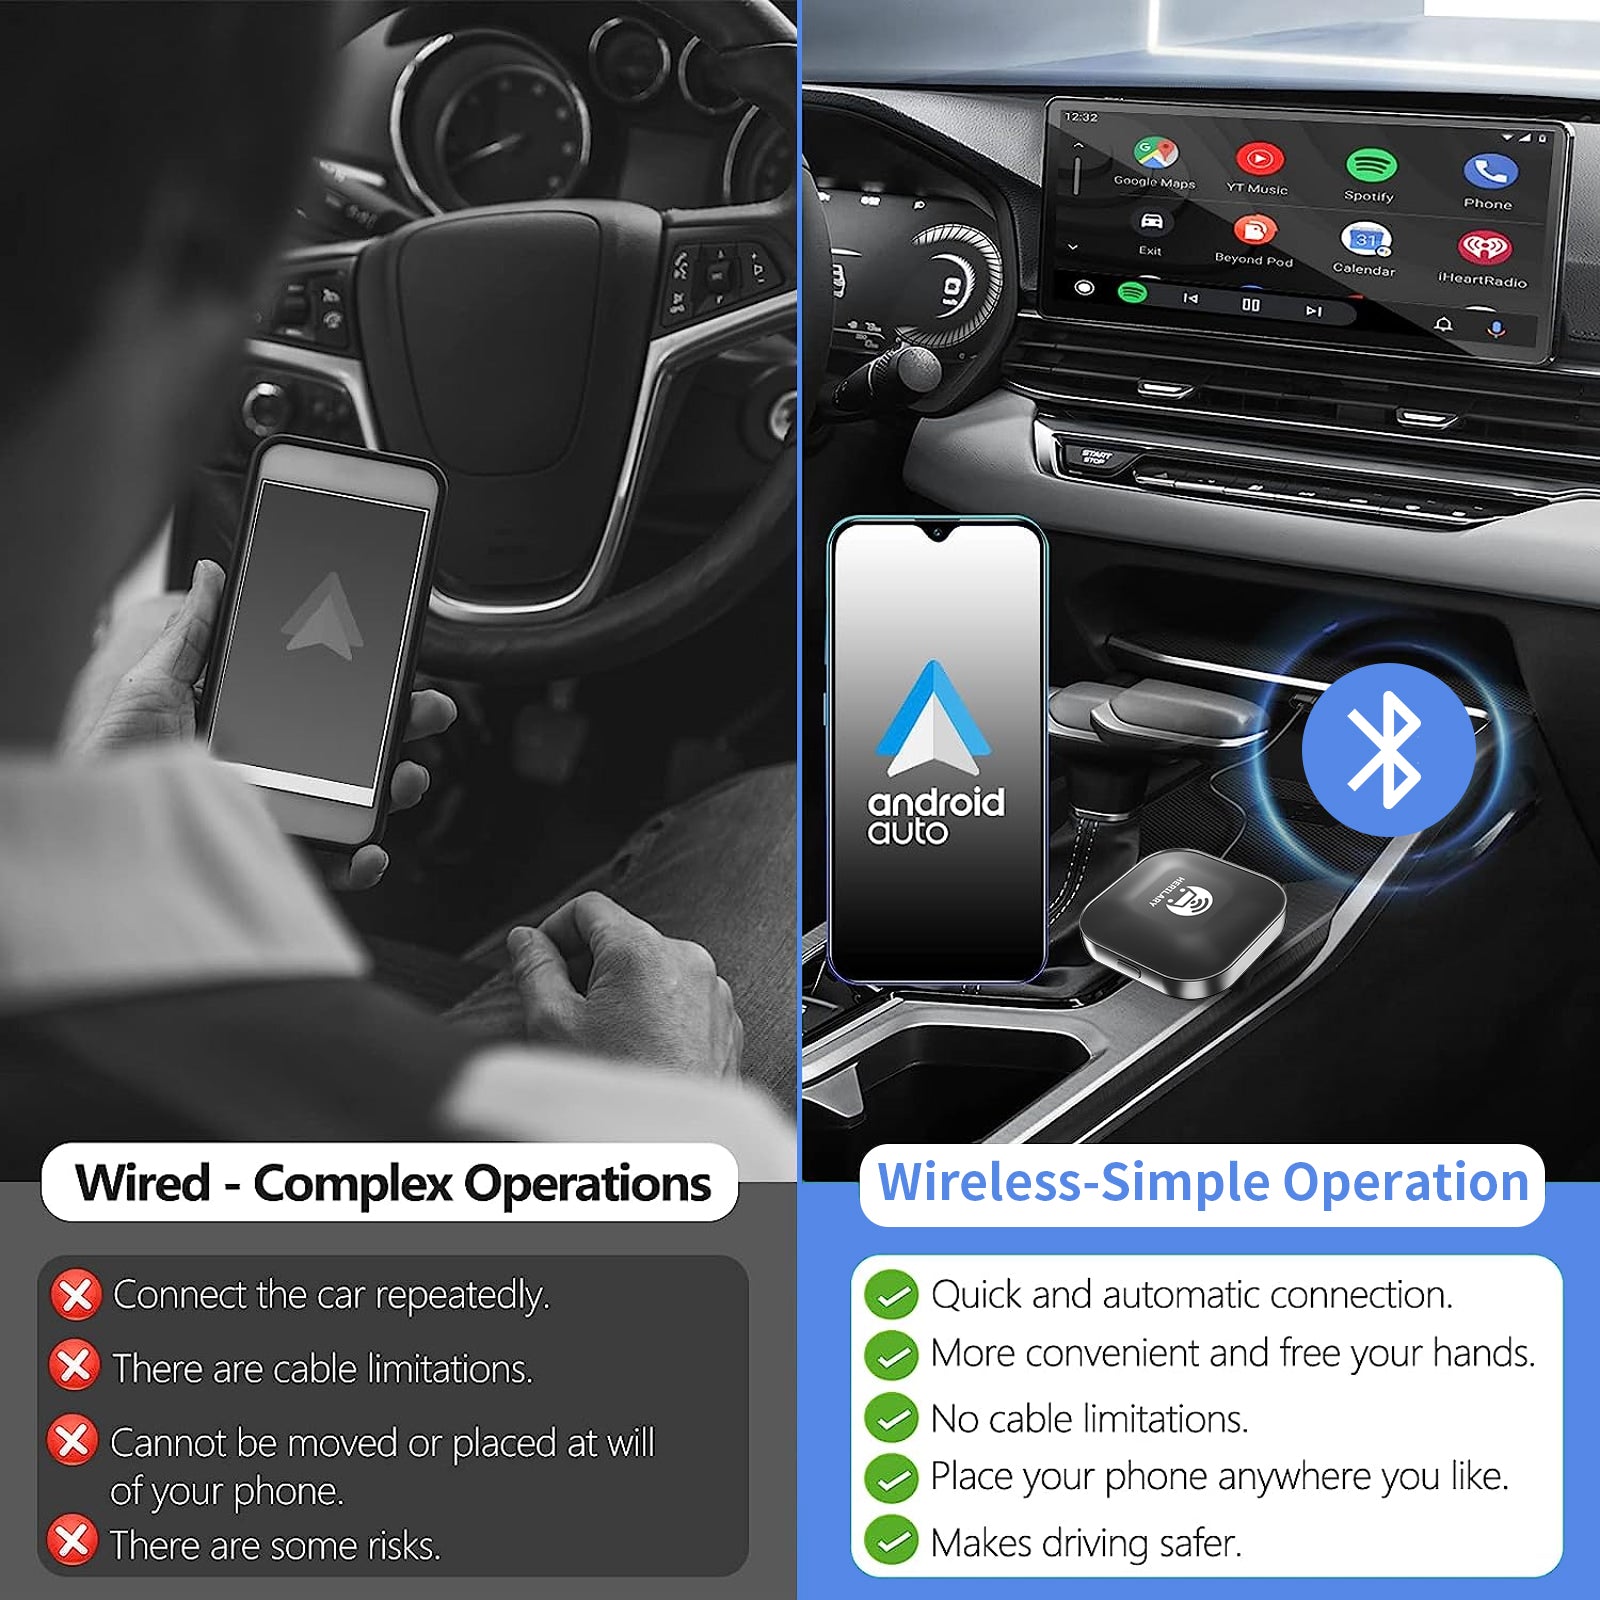 UP TO 40% OFF! C1-AA Wireless Android Auto Adapter – Herilary